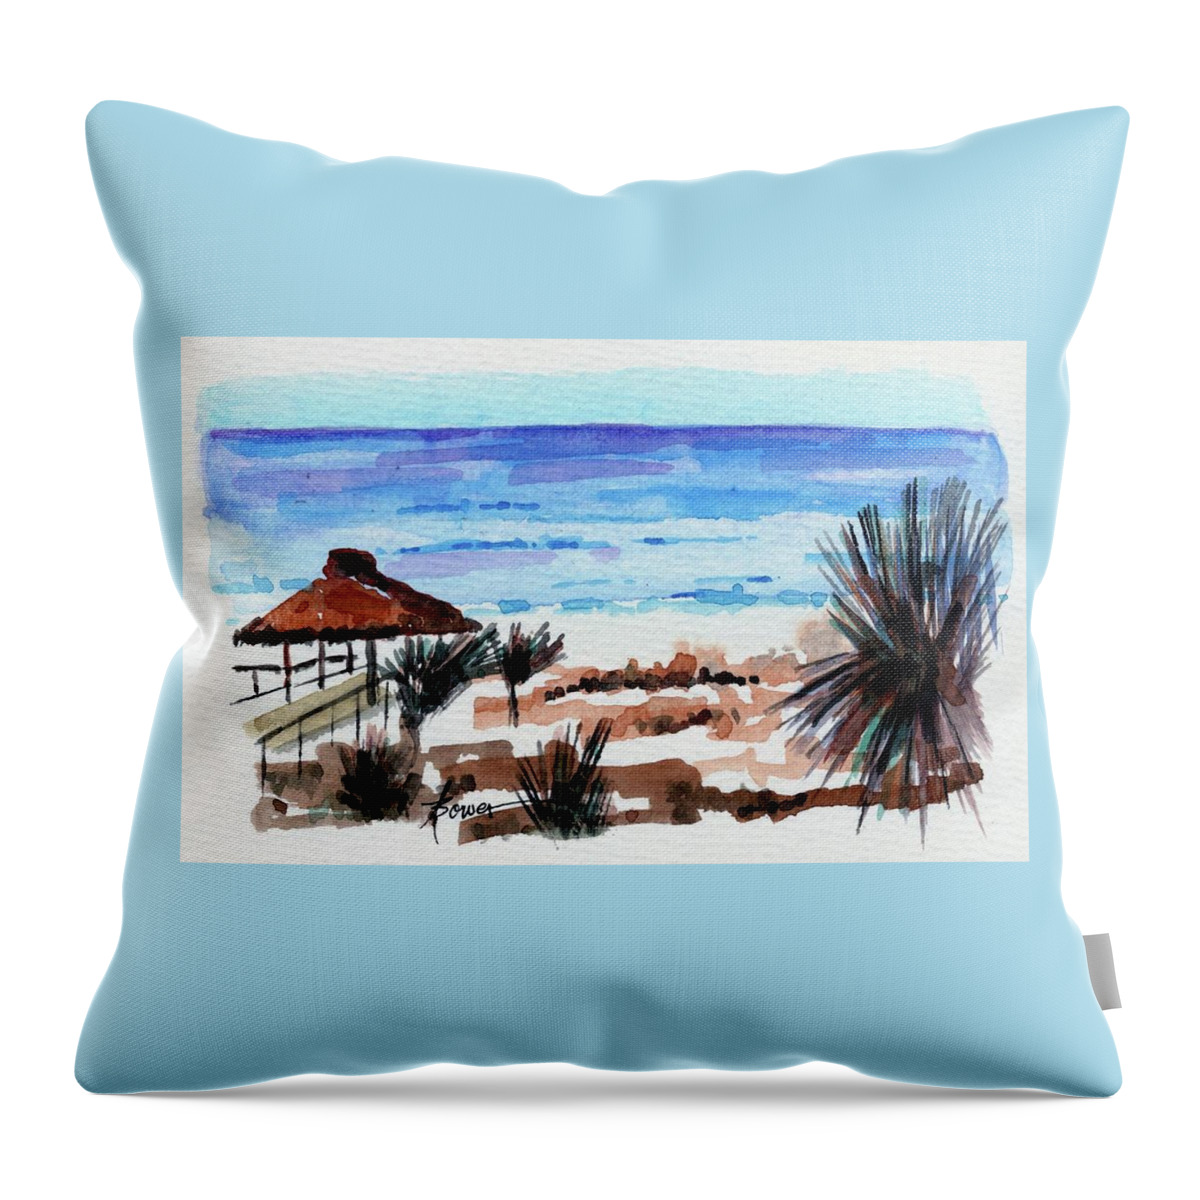 Vacation Throw Pillow featuring the painting Okaloosa Island, Florida by Adele Bower